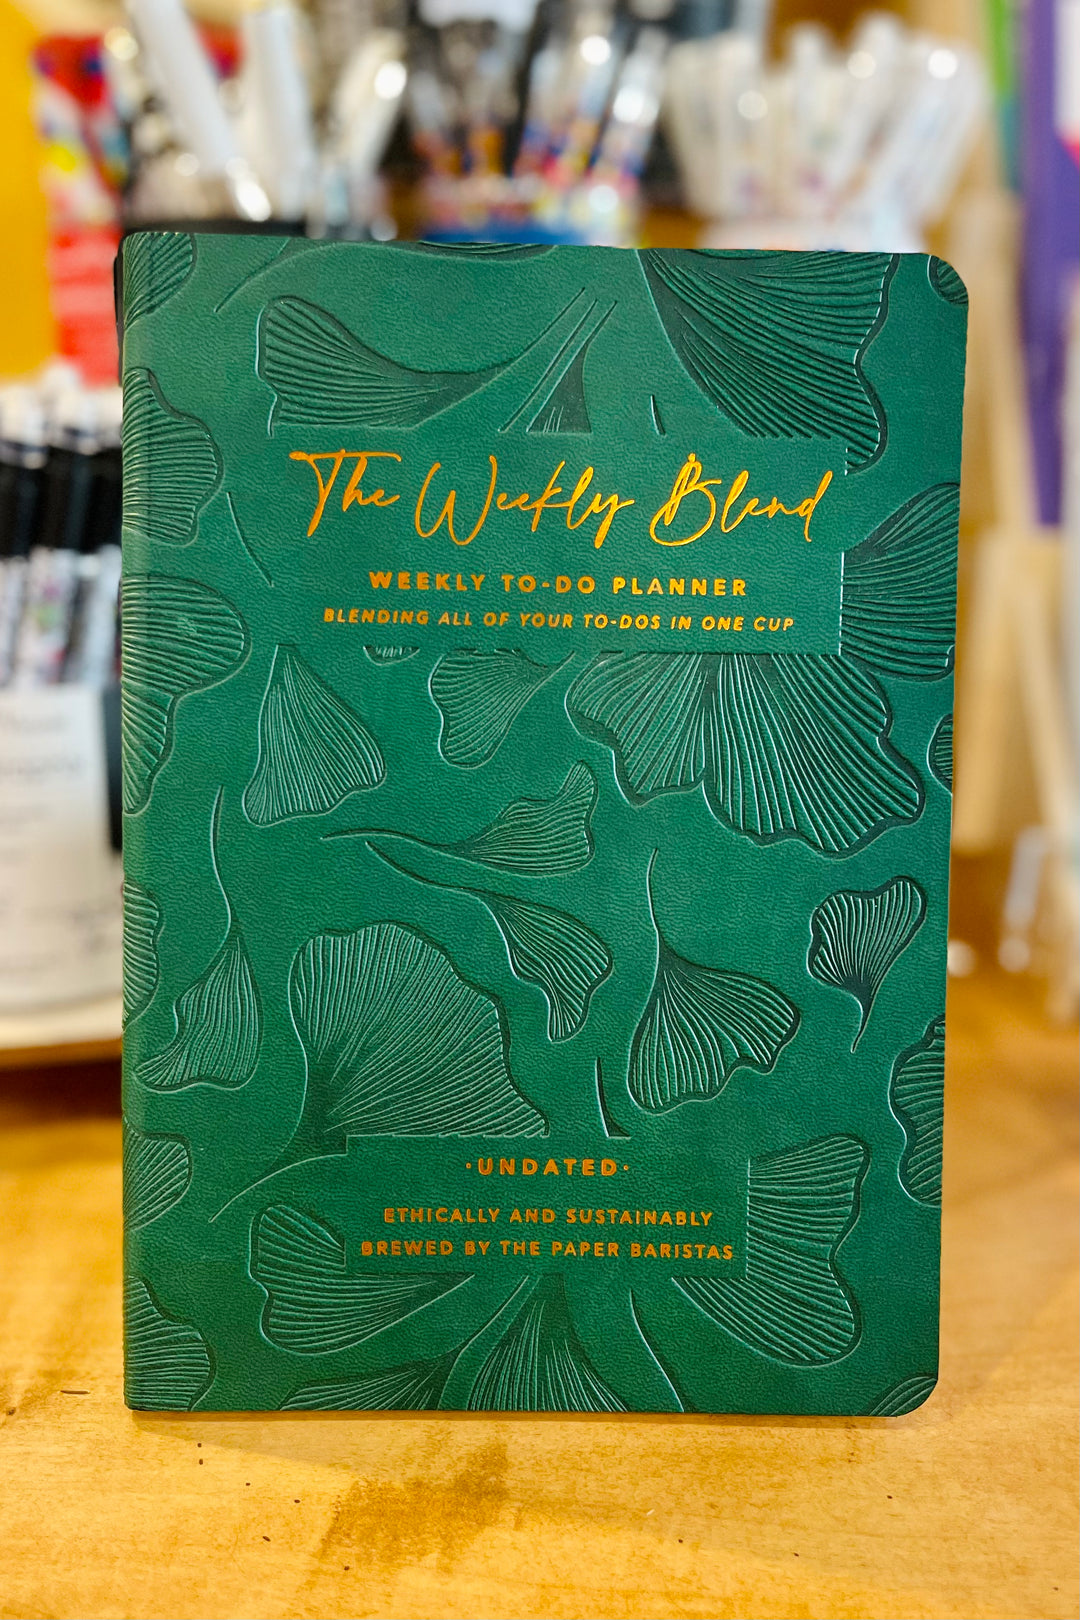 "The Weekly Blend" Undated Green Wkly ToDo + DotGrid Planner